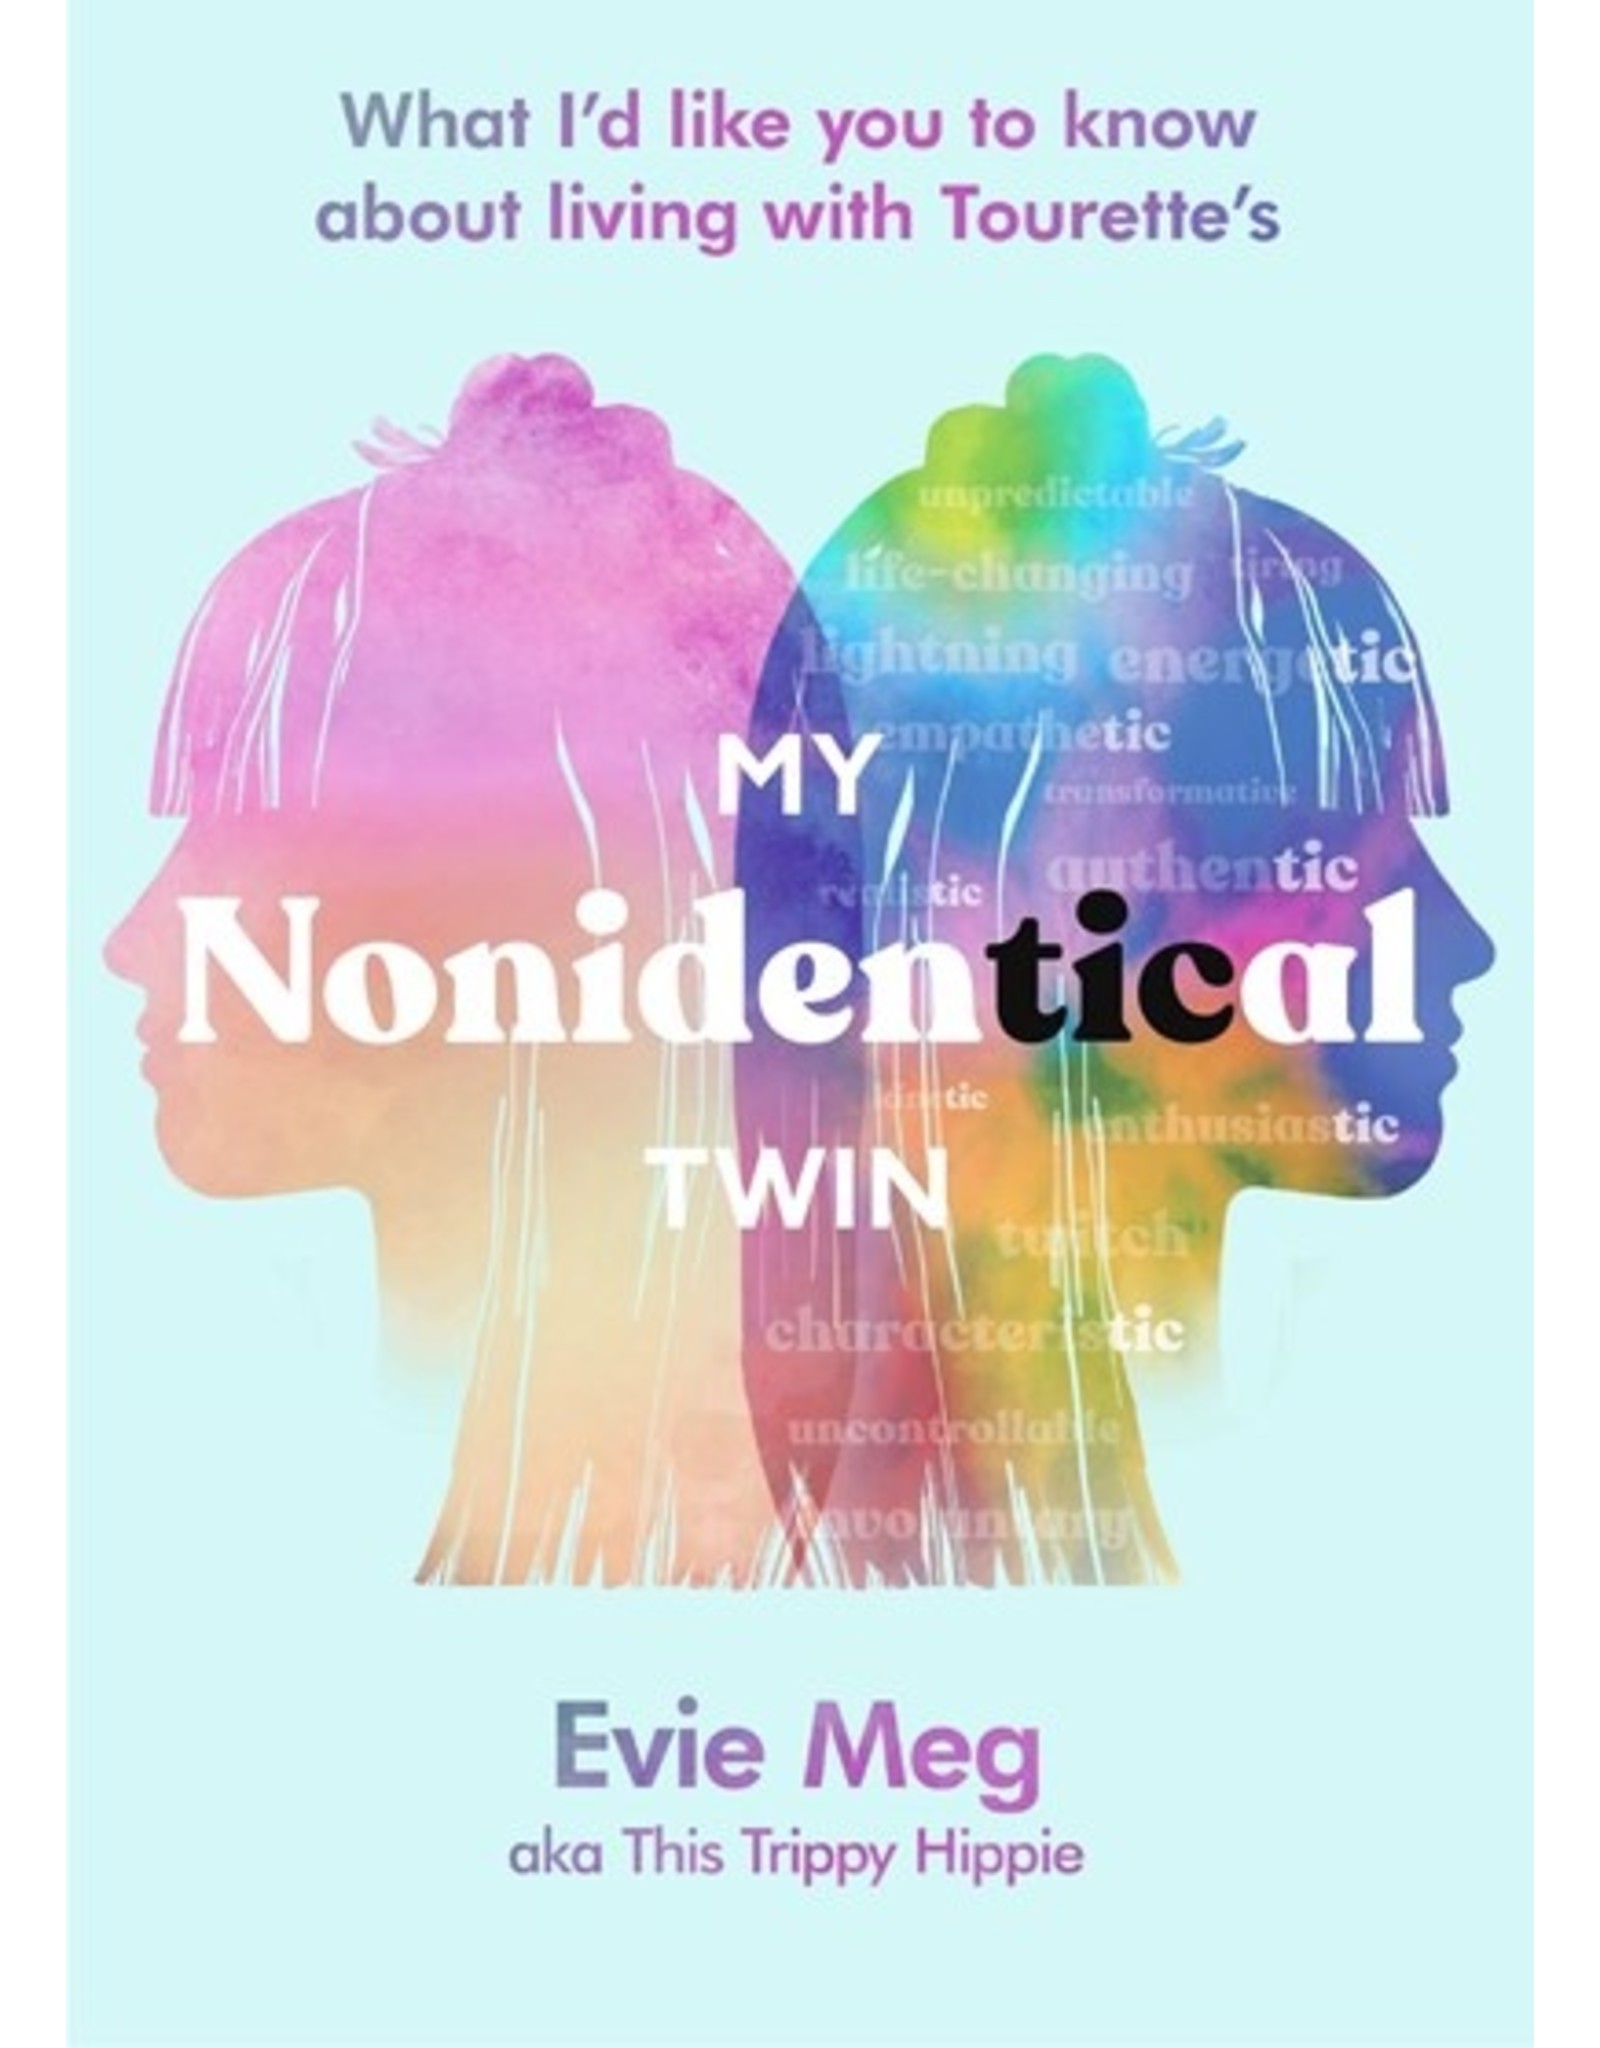 Books My Nonidentical Twin : What I'd like you to know about living with Tourette's  Evie Meg - This Trippy Hippie